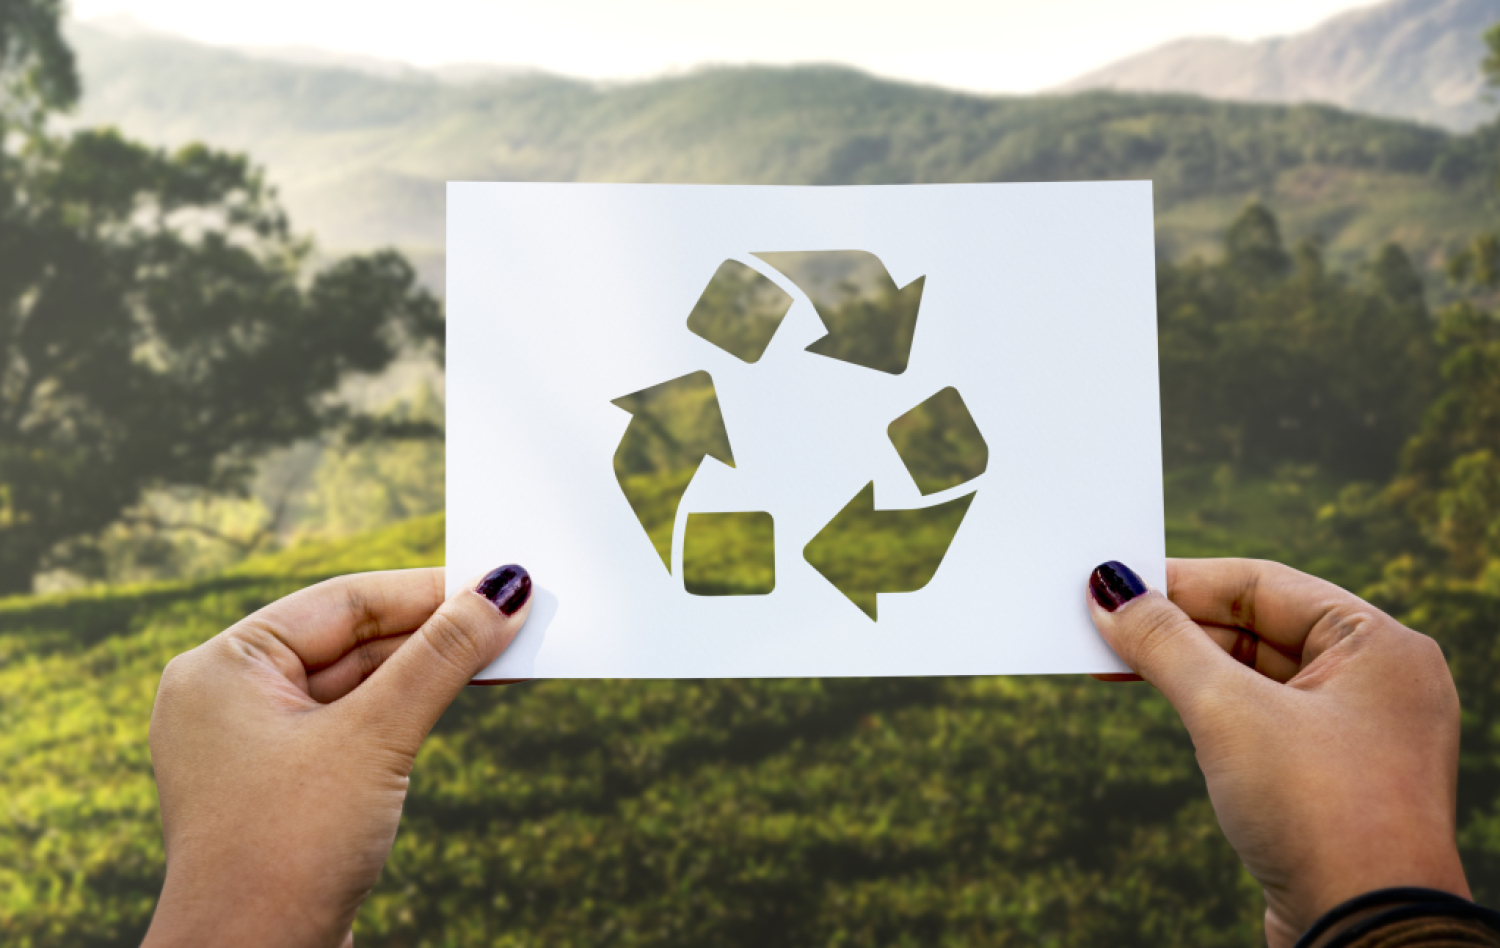 In Czech Republic was established the Alliance for promotion of recycling